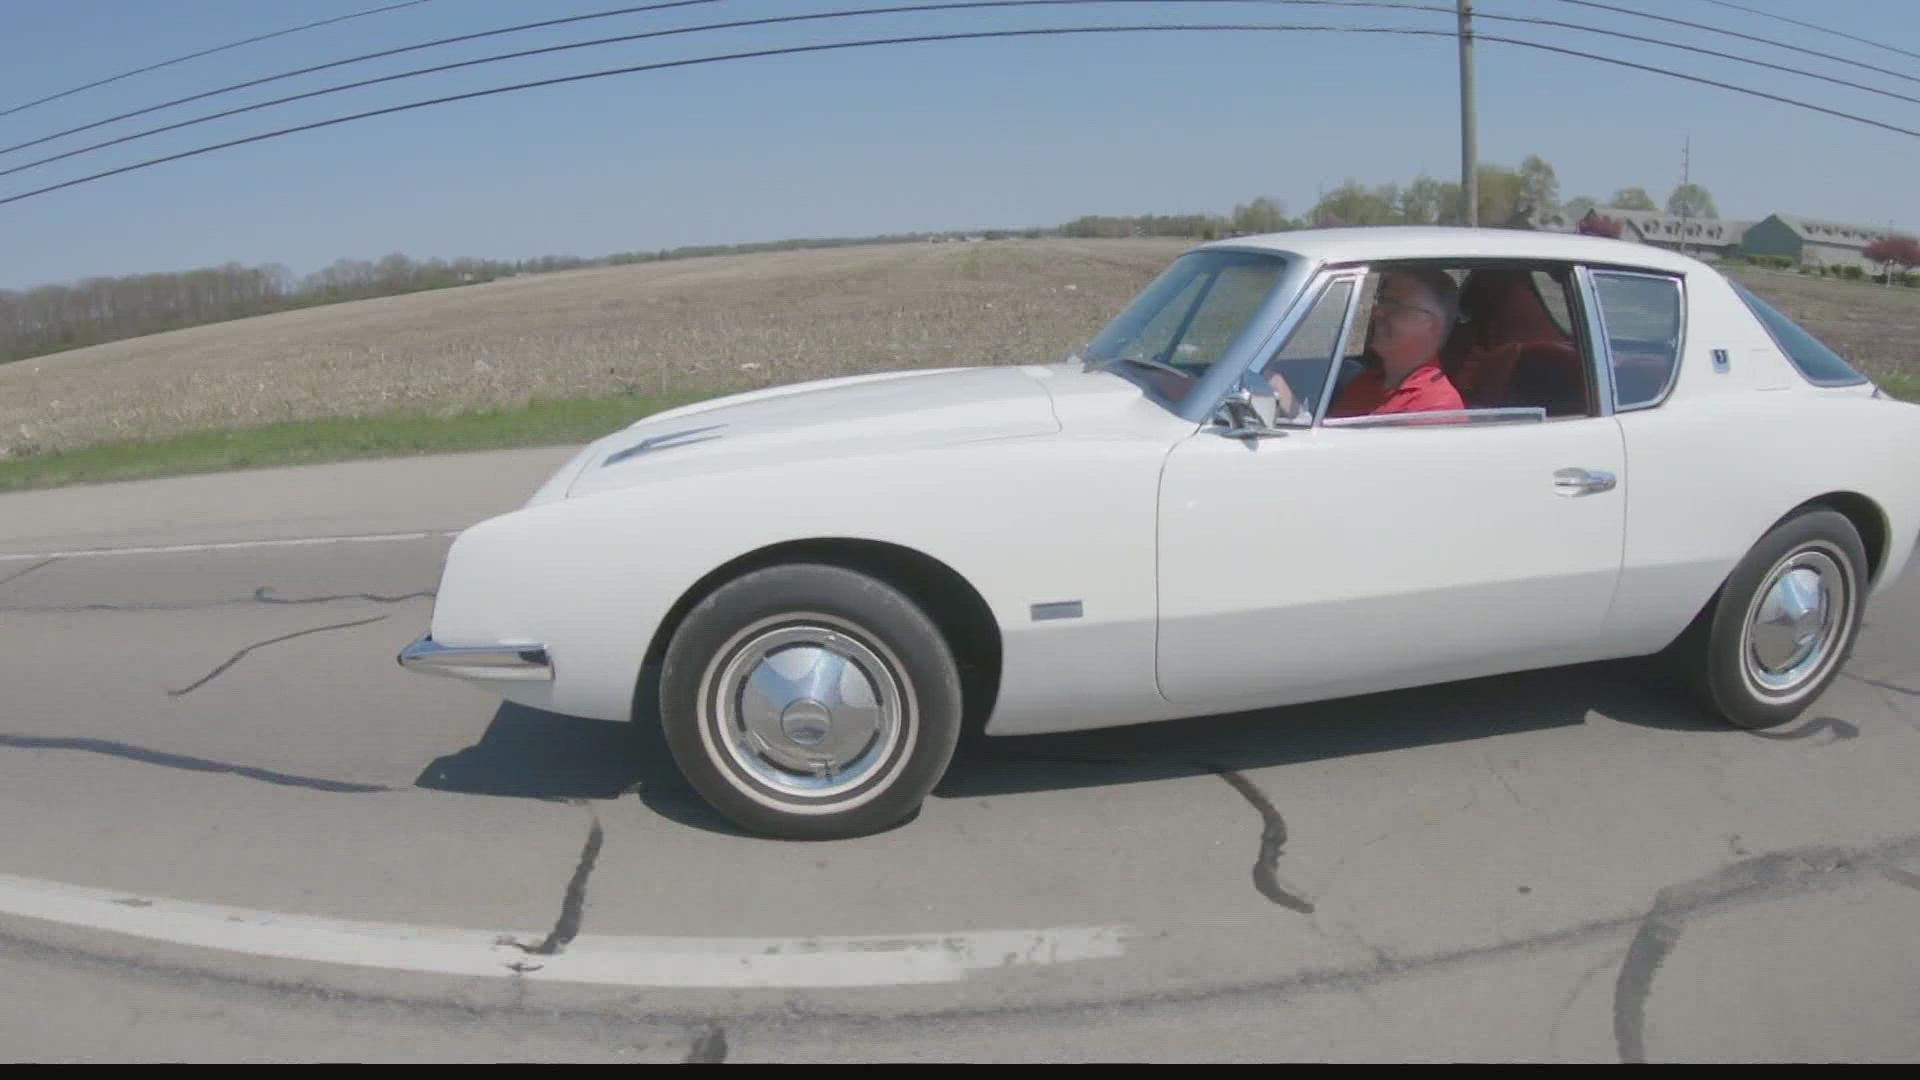 A local man is bringing classic sports cars back to life.